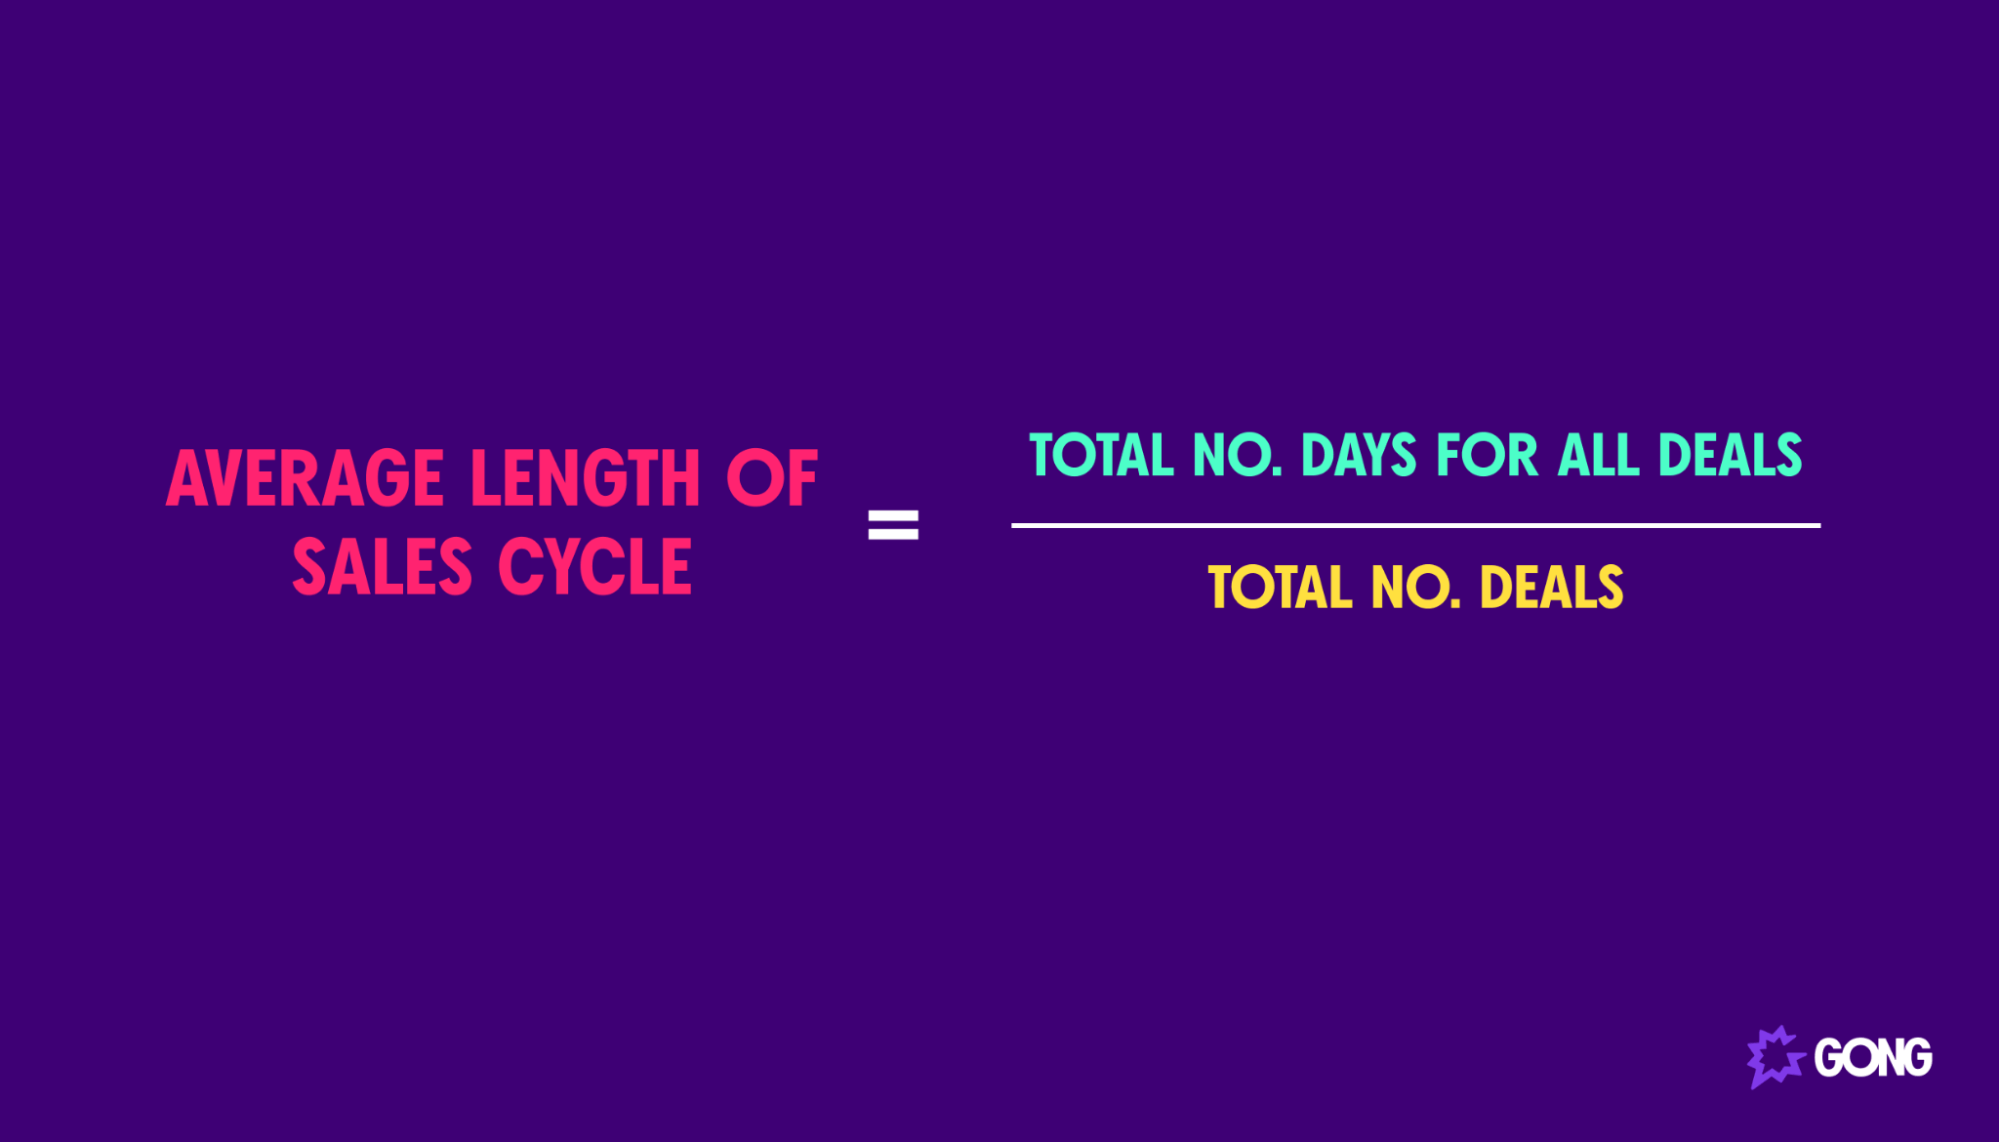 Calculation of average sales cycle length